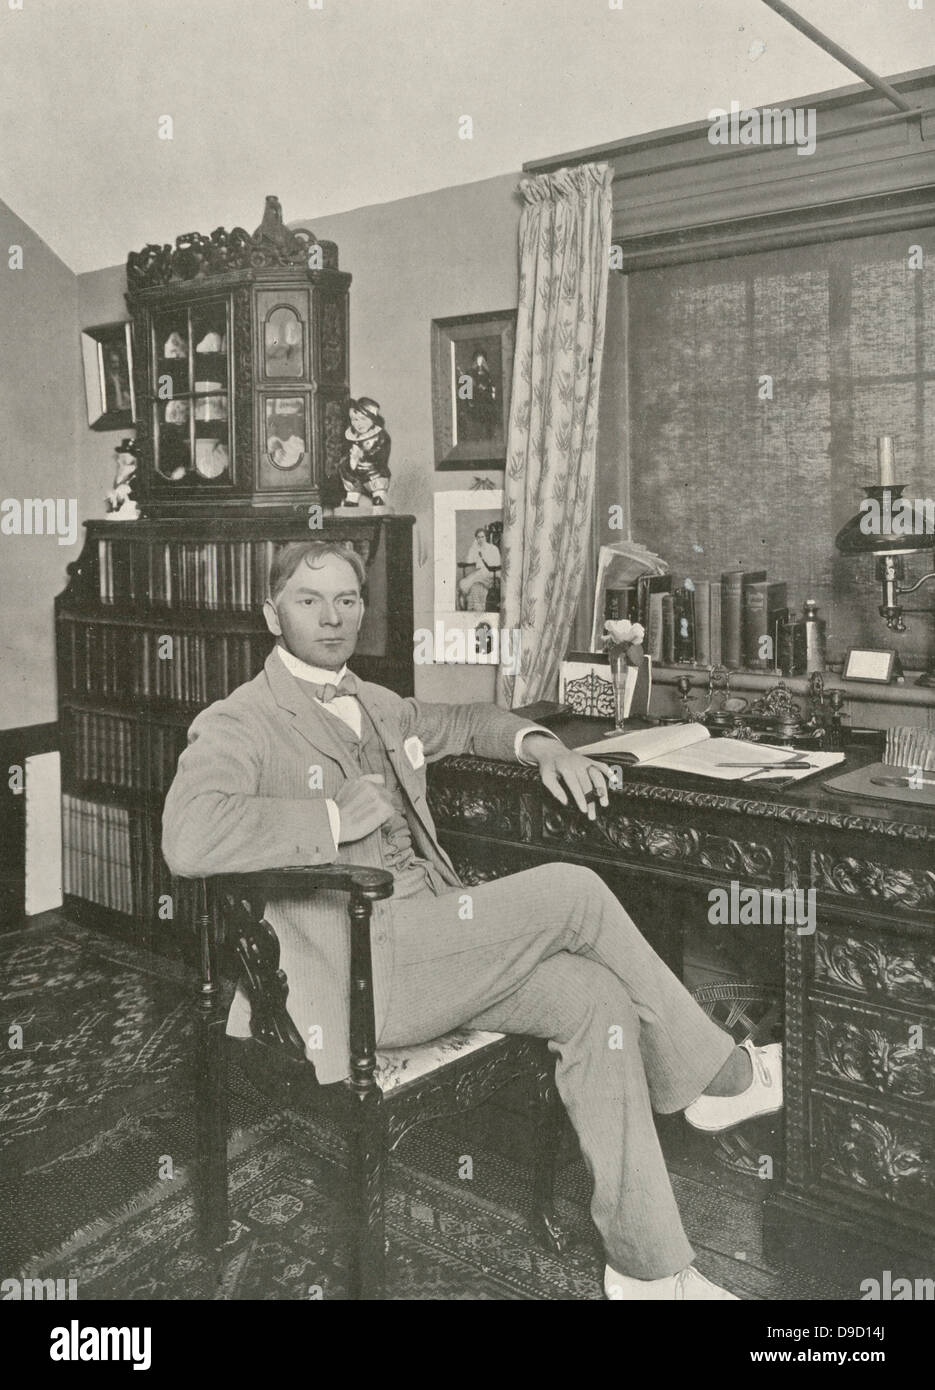 Jerome Klapka Jerome (1859-1927) was an English write. Playwright, and humorist, best known for the humorous tale  Three Men in a Boat. Jerome a home at his desk at Goulds Grove, Wallingford, c1903. Stock Photo